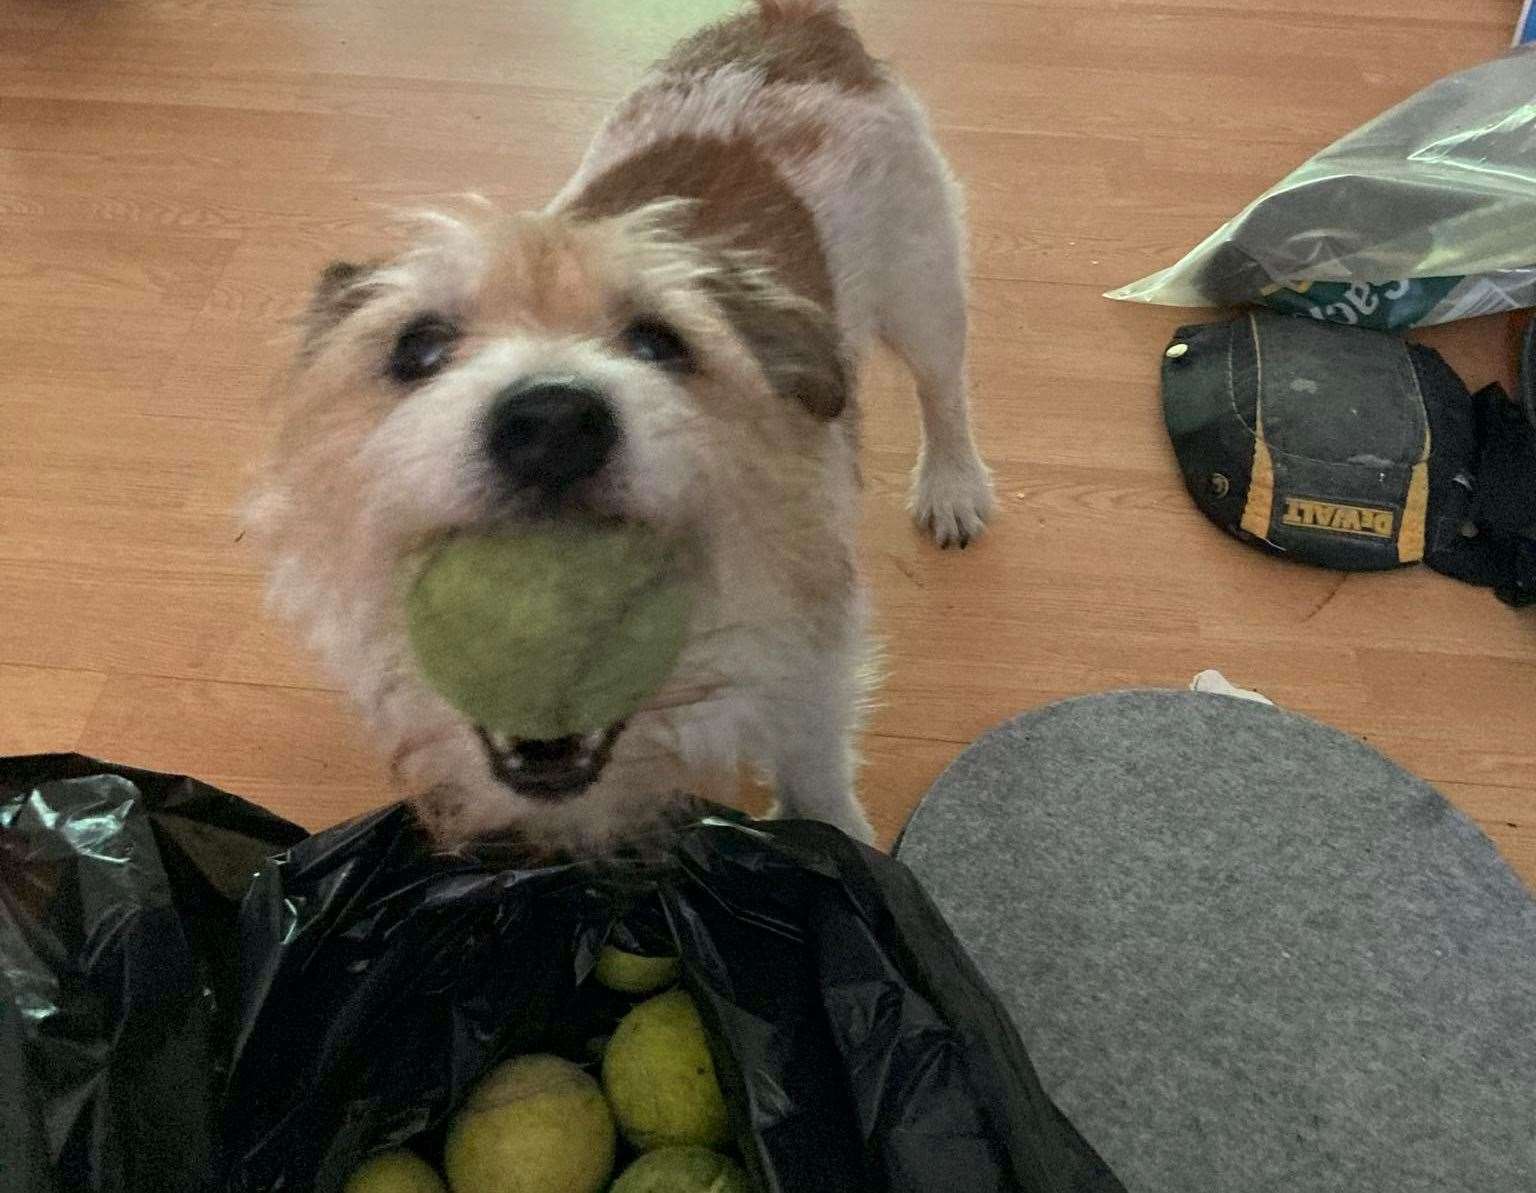 The cheeky chappy has collected around 100 tennis balls. Picture: Shauneen Fowler